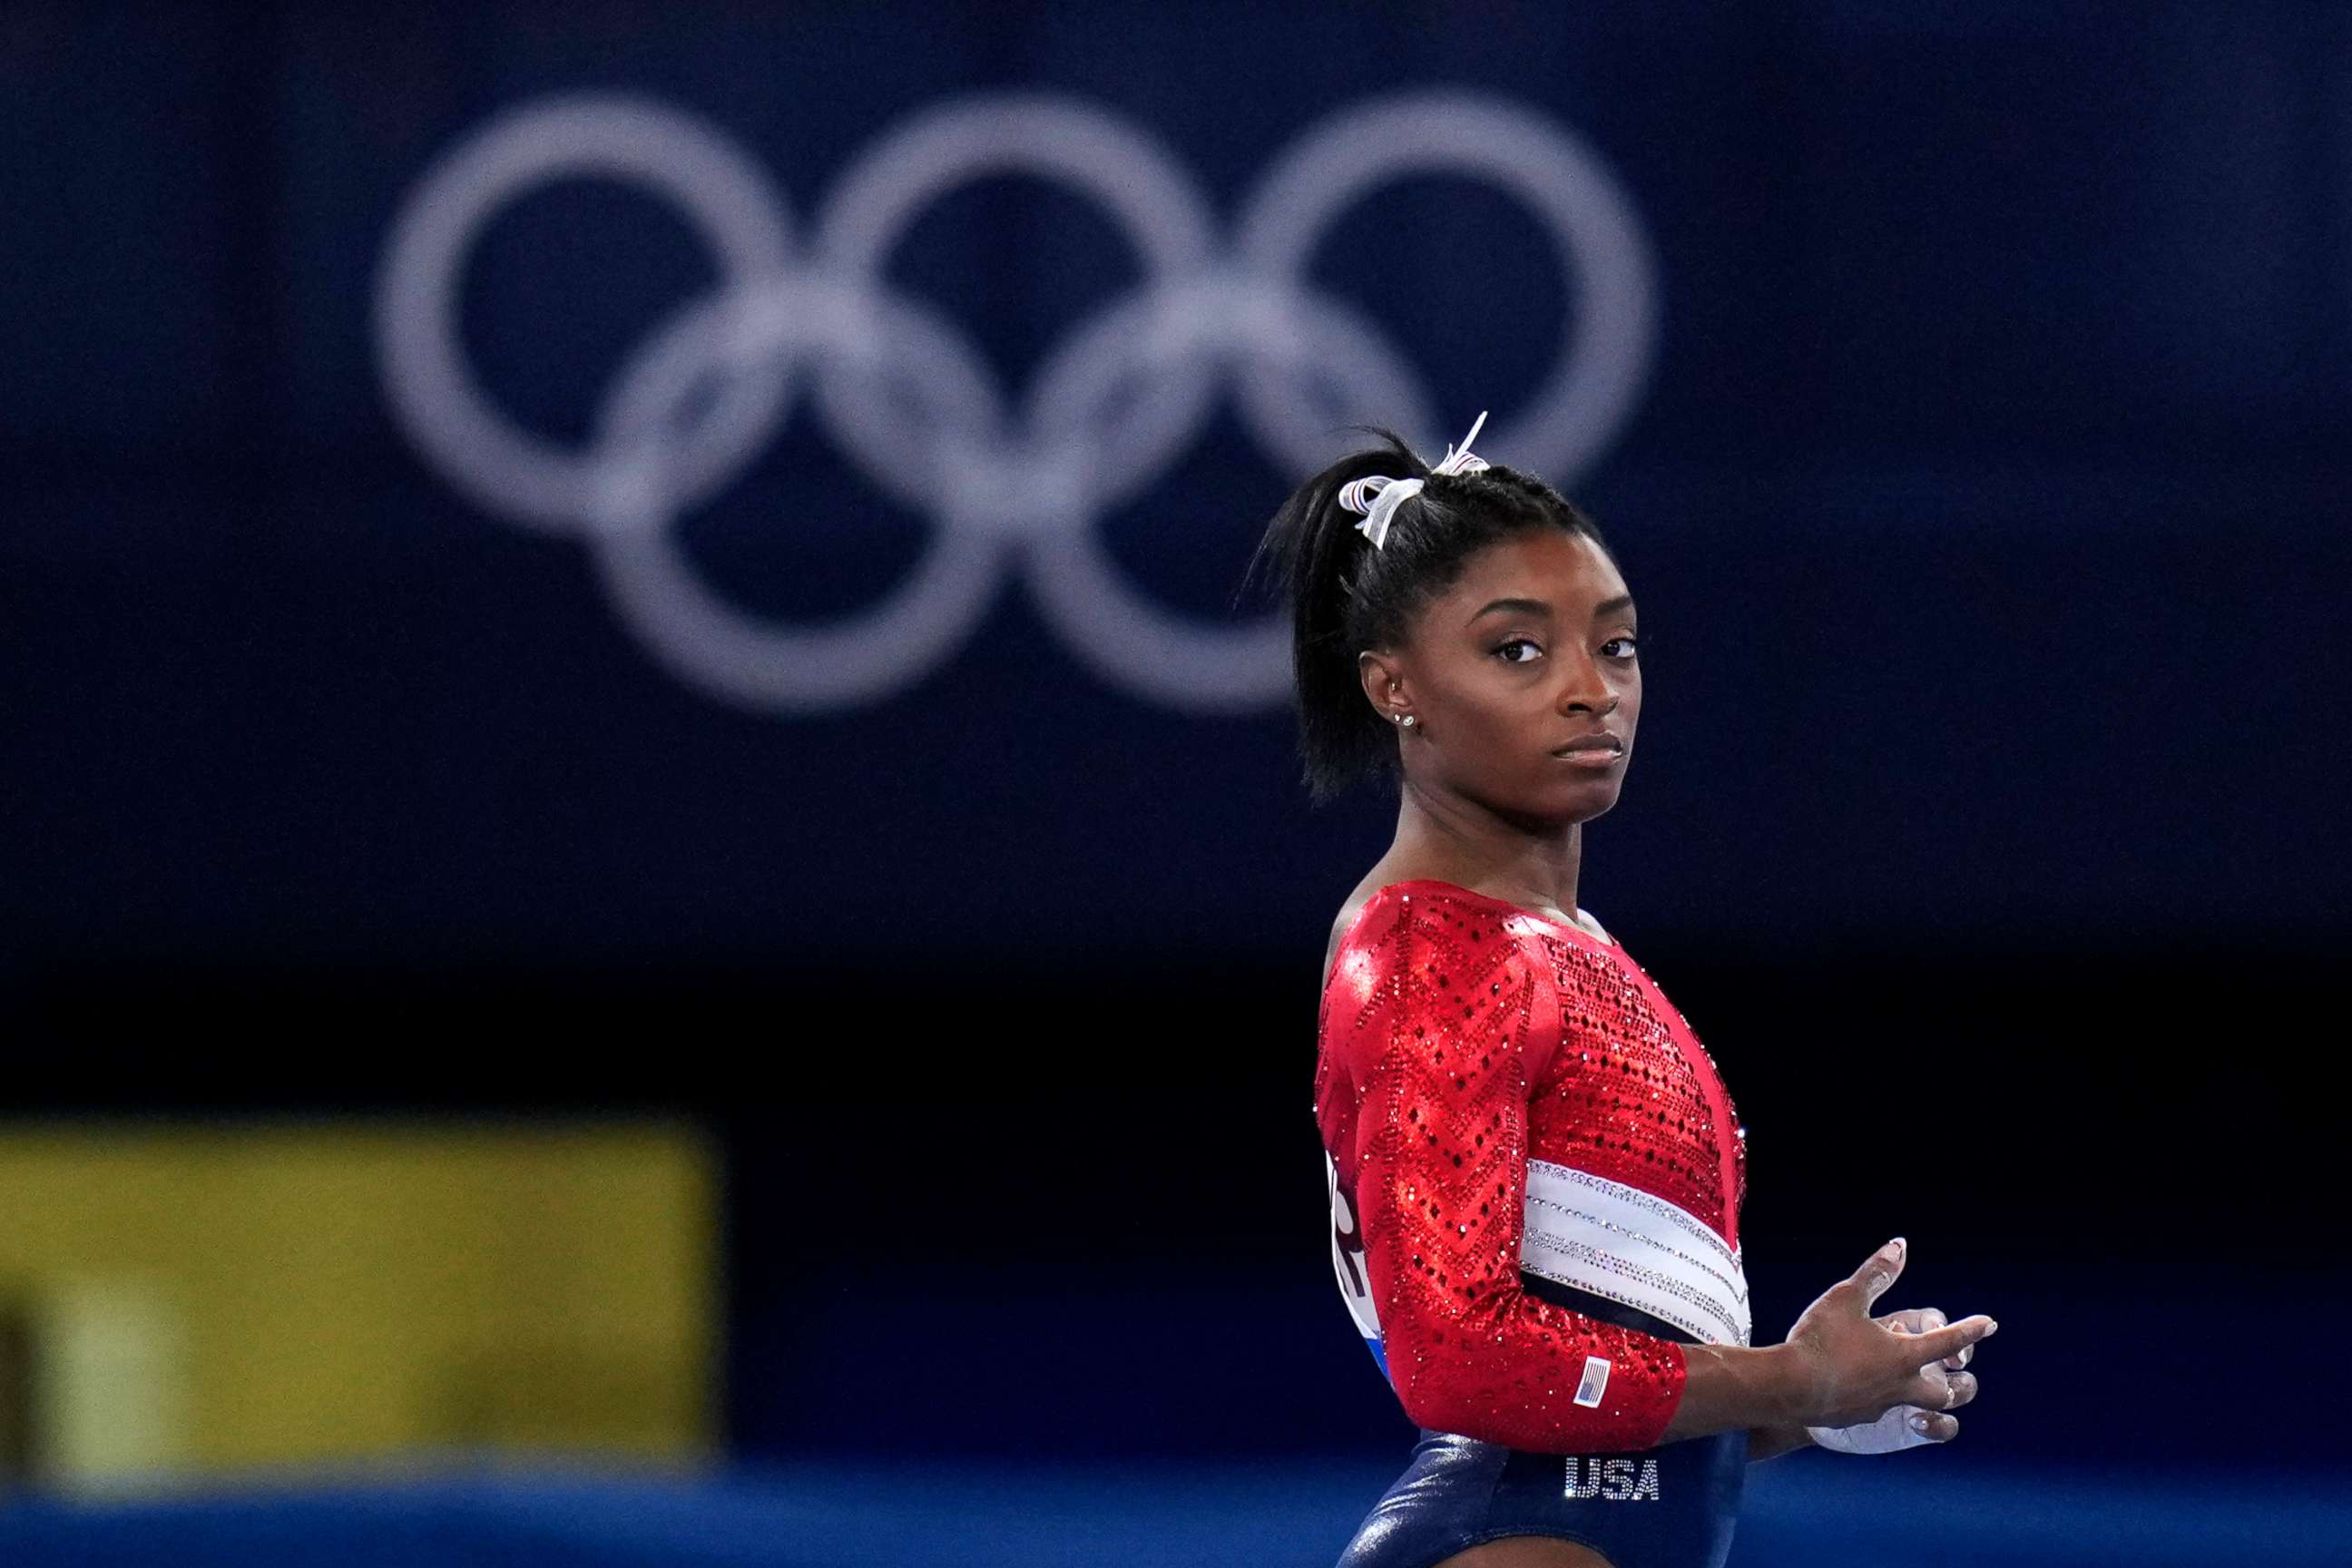 PHOTO: File-This July 27, 2021, file photo shows Simone Biles, of the United States, waiting to perform on the vault during the artistic gymnastics women's final at the 2020 Summer Olympics, Tuesday, July 27, 2021, in Tokyo.